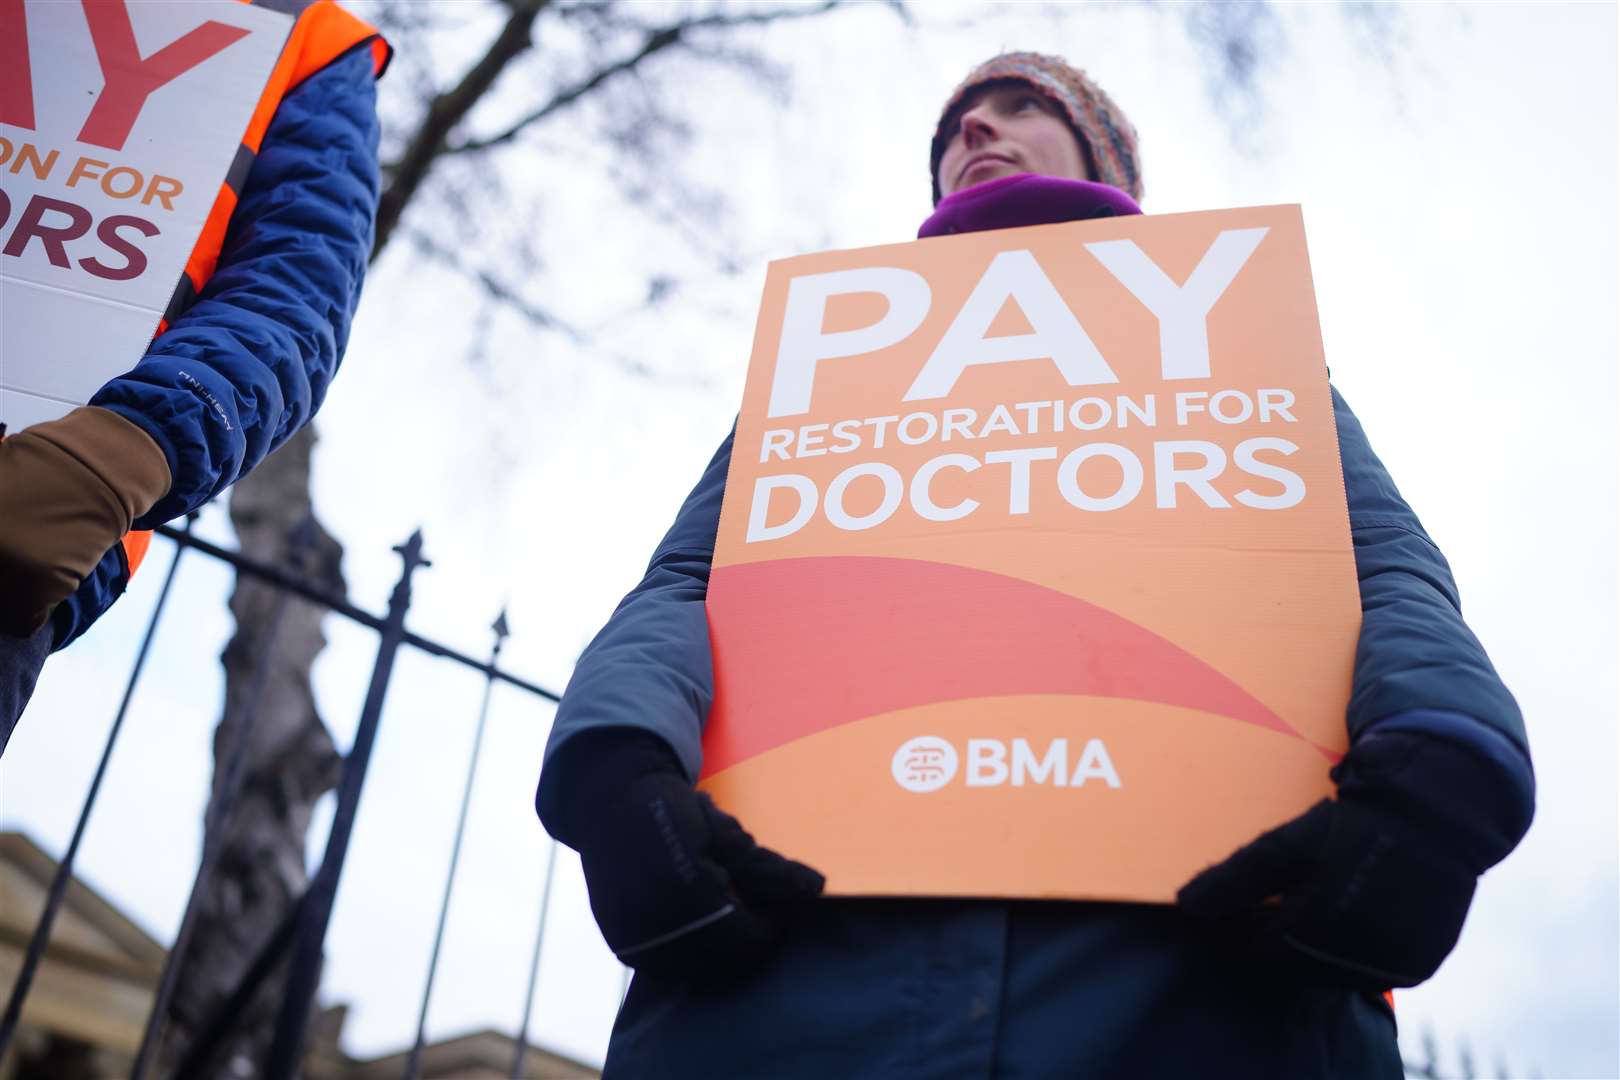 The latest junior doctors’ strike in England caused ‘delay and disruption’ to thousands of patients, health bosses have said (Ben Birchall/PA)